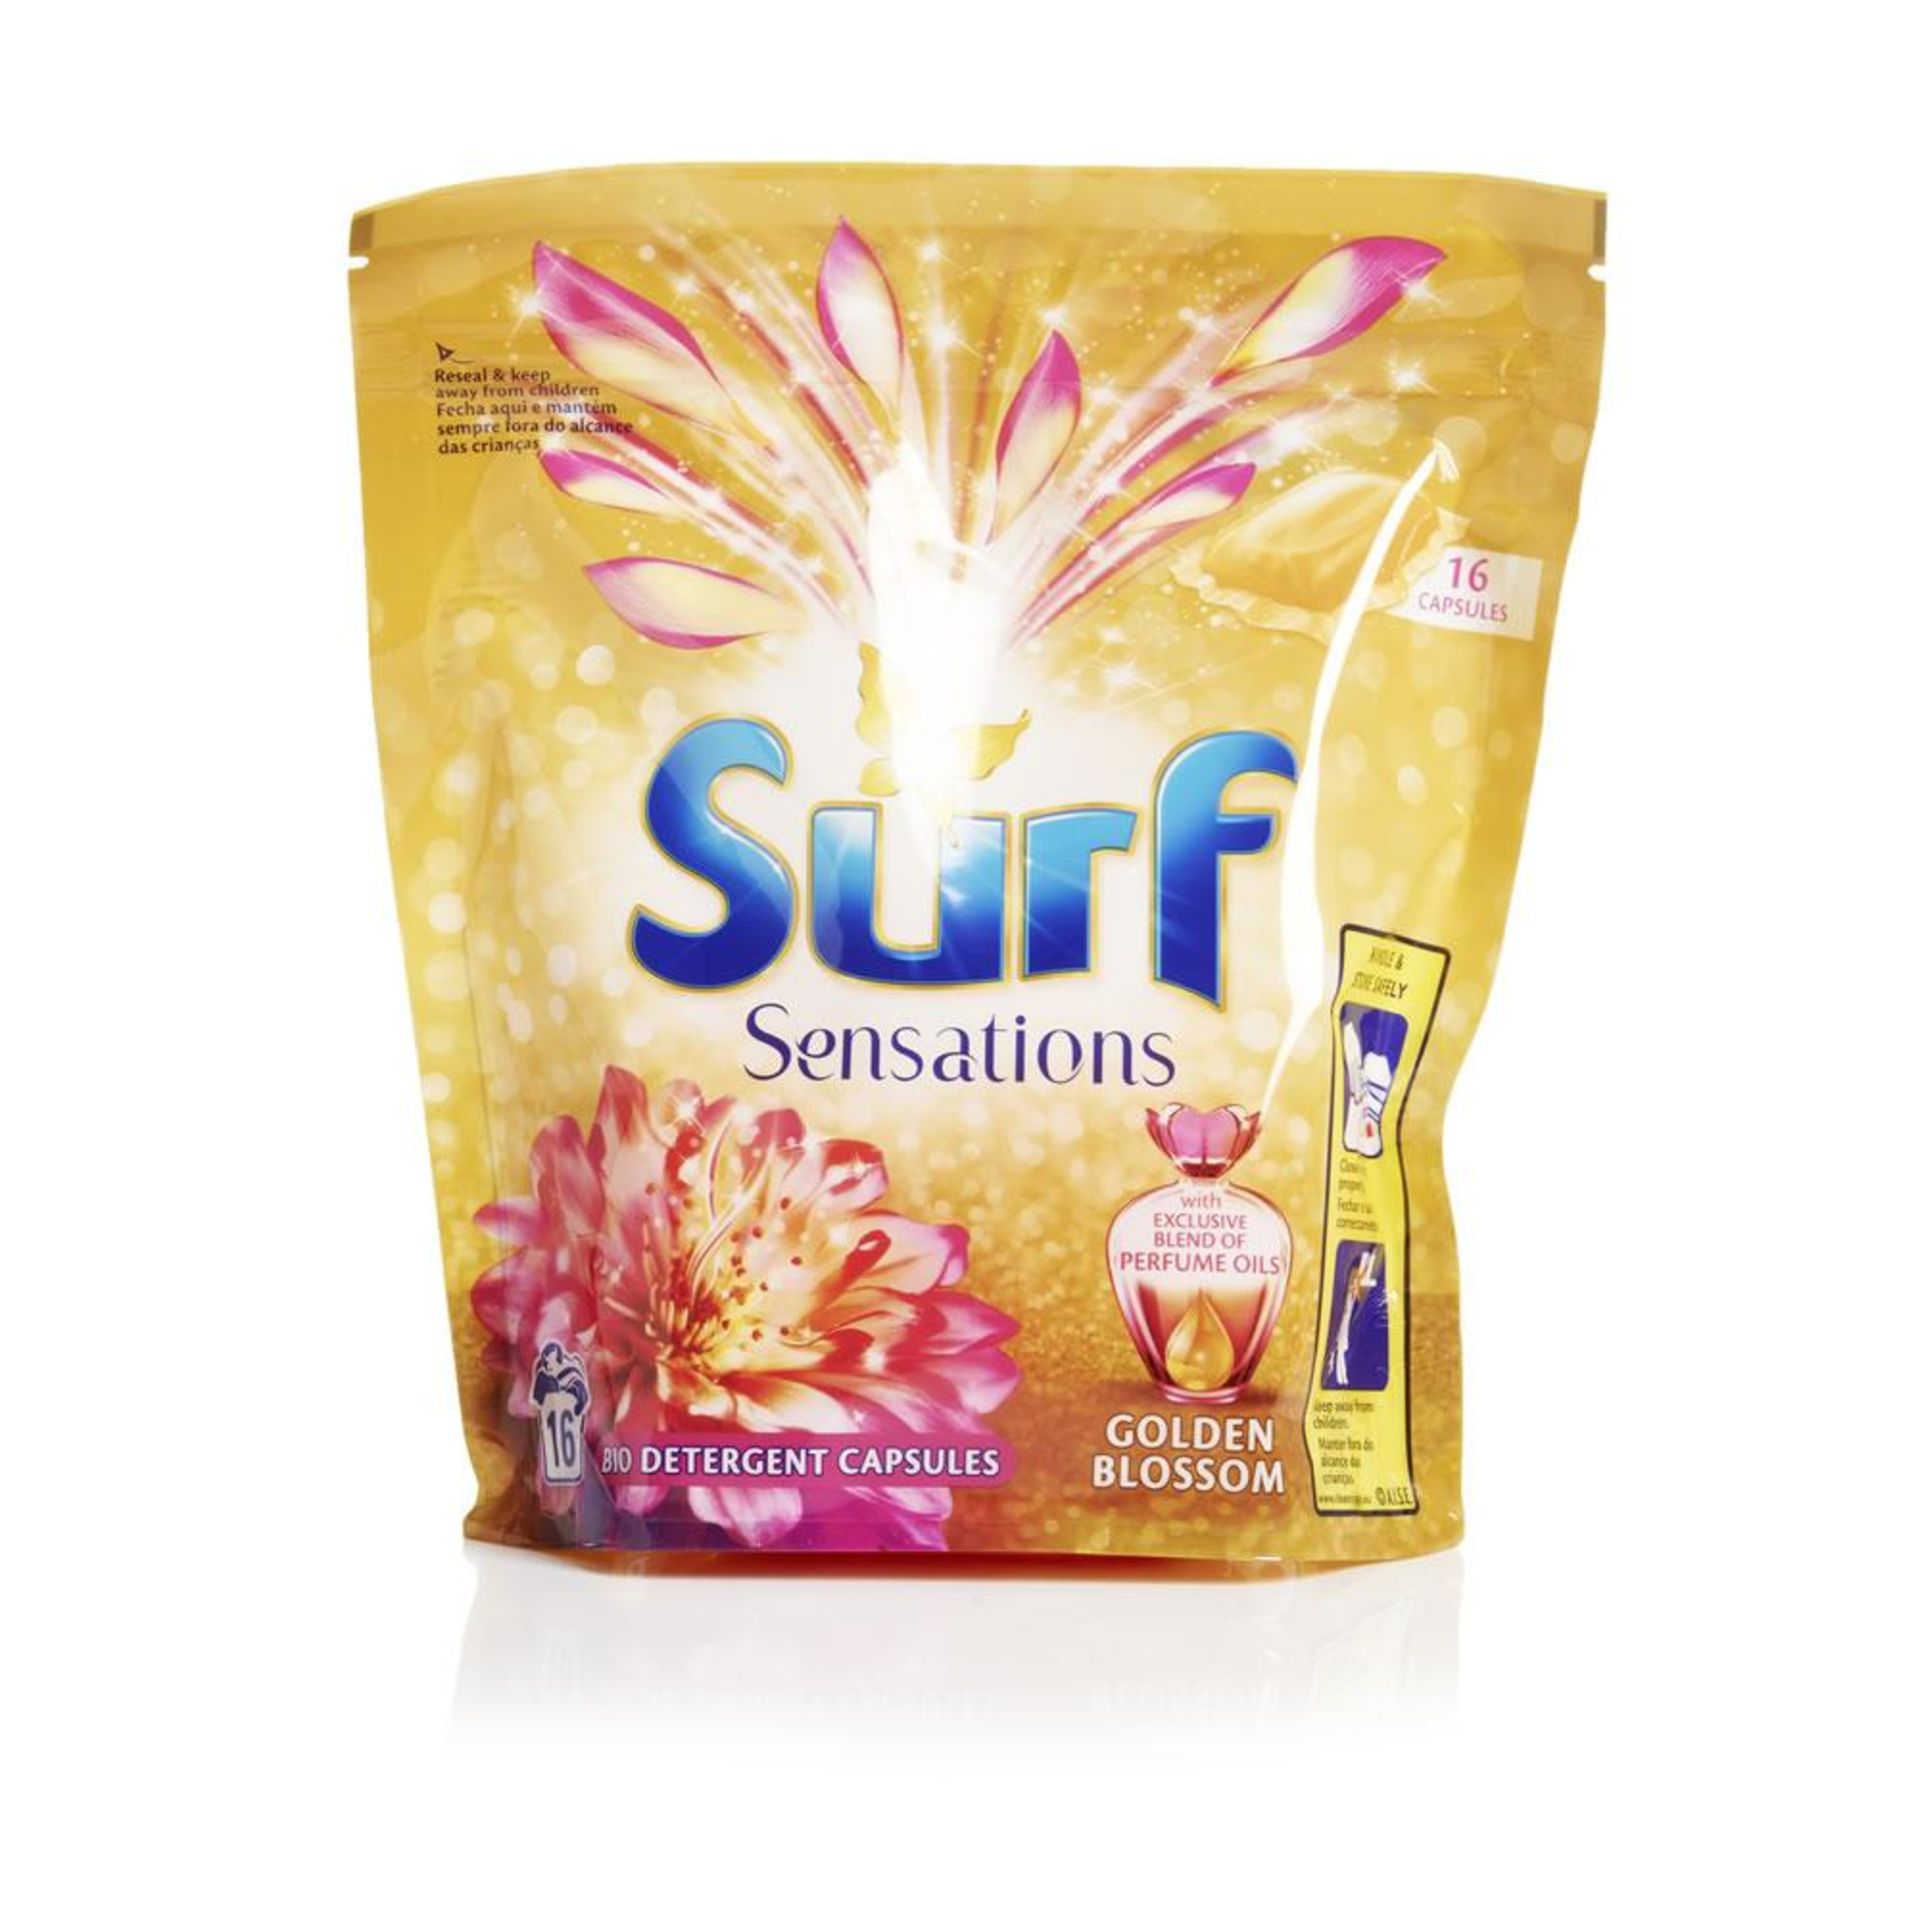 V *TRADE QTY* Brand New Surf Sensations Golden Blossom 18 Wash Capsules X 60 YOUR BID PRICE TO BE